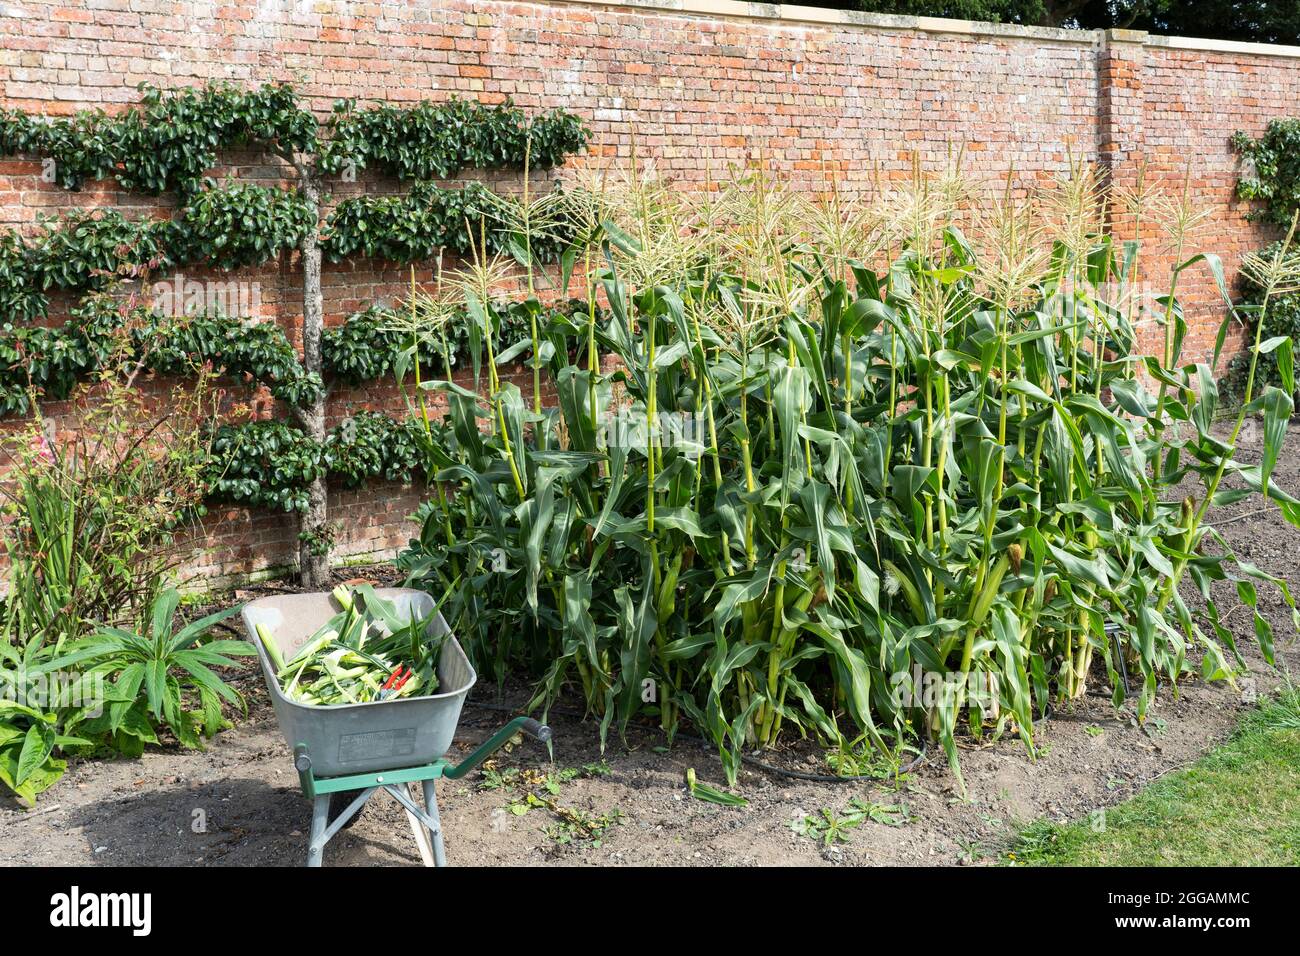 RHS Sweet Corn Goldcrest F1 stalks growing in the historic Georgian Walled Gardens at Croome Court, with harvested corn cobs in a wheelbarrow. UK Stock Photo